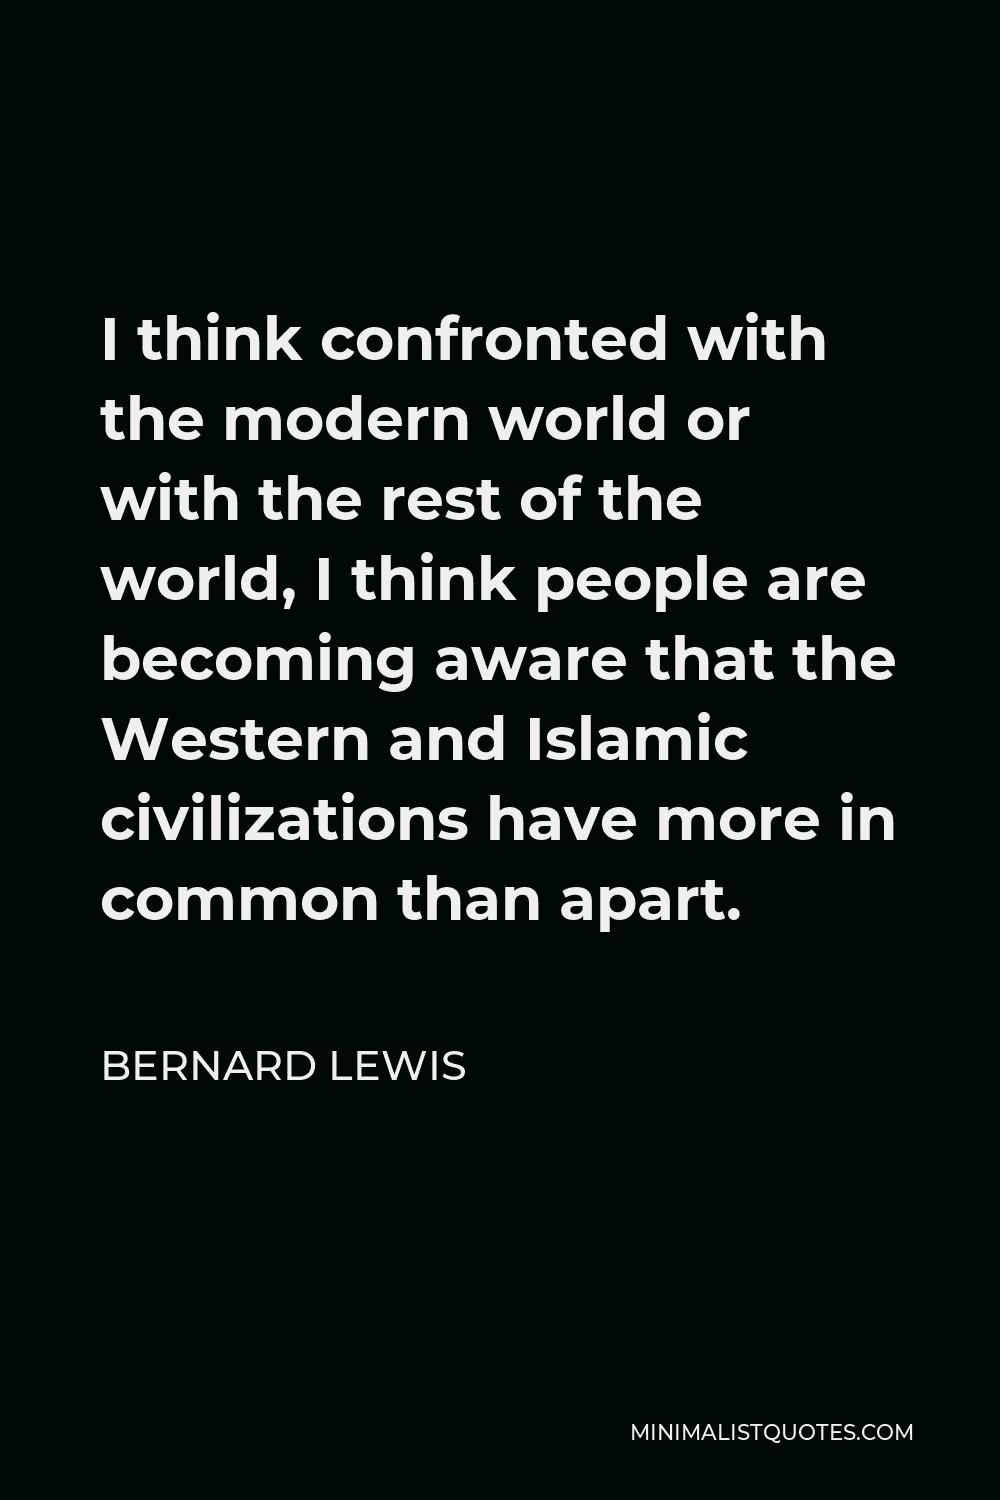 Bernard Lewis Quote - I think confronted with the modern world or with the rest of the world, I think people are becoming aware that the Western and Islamic civilizations have more in common than apart.